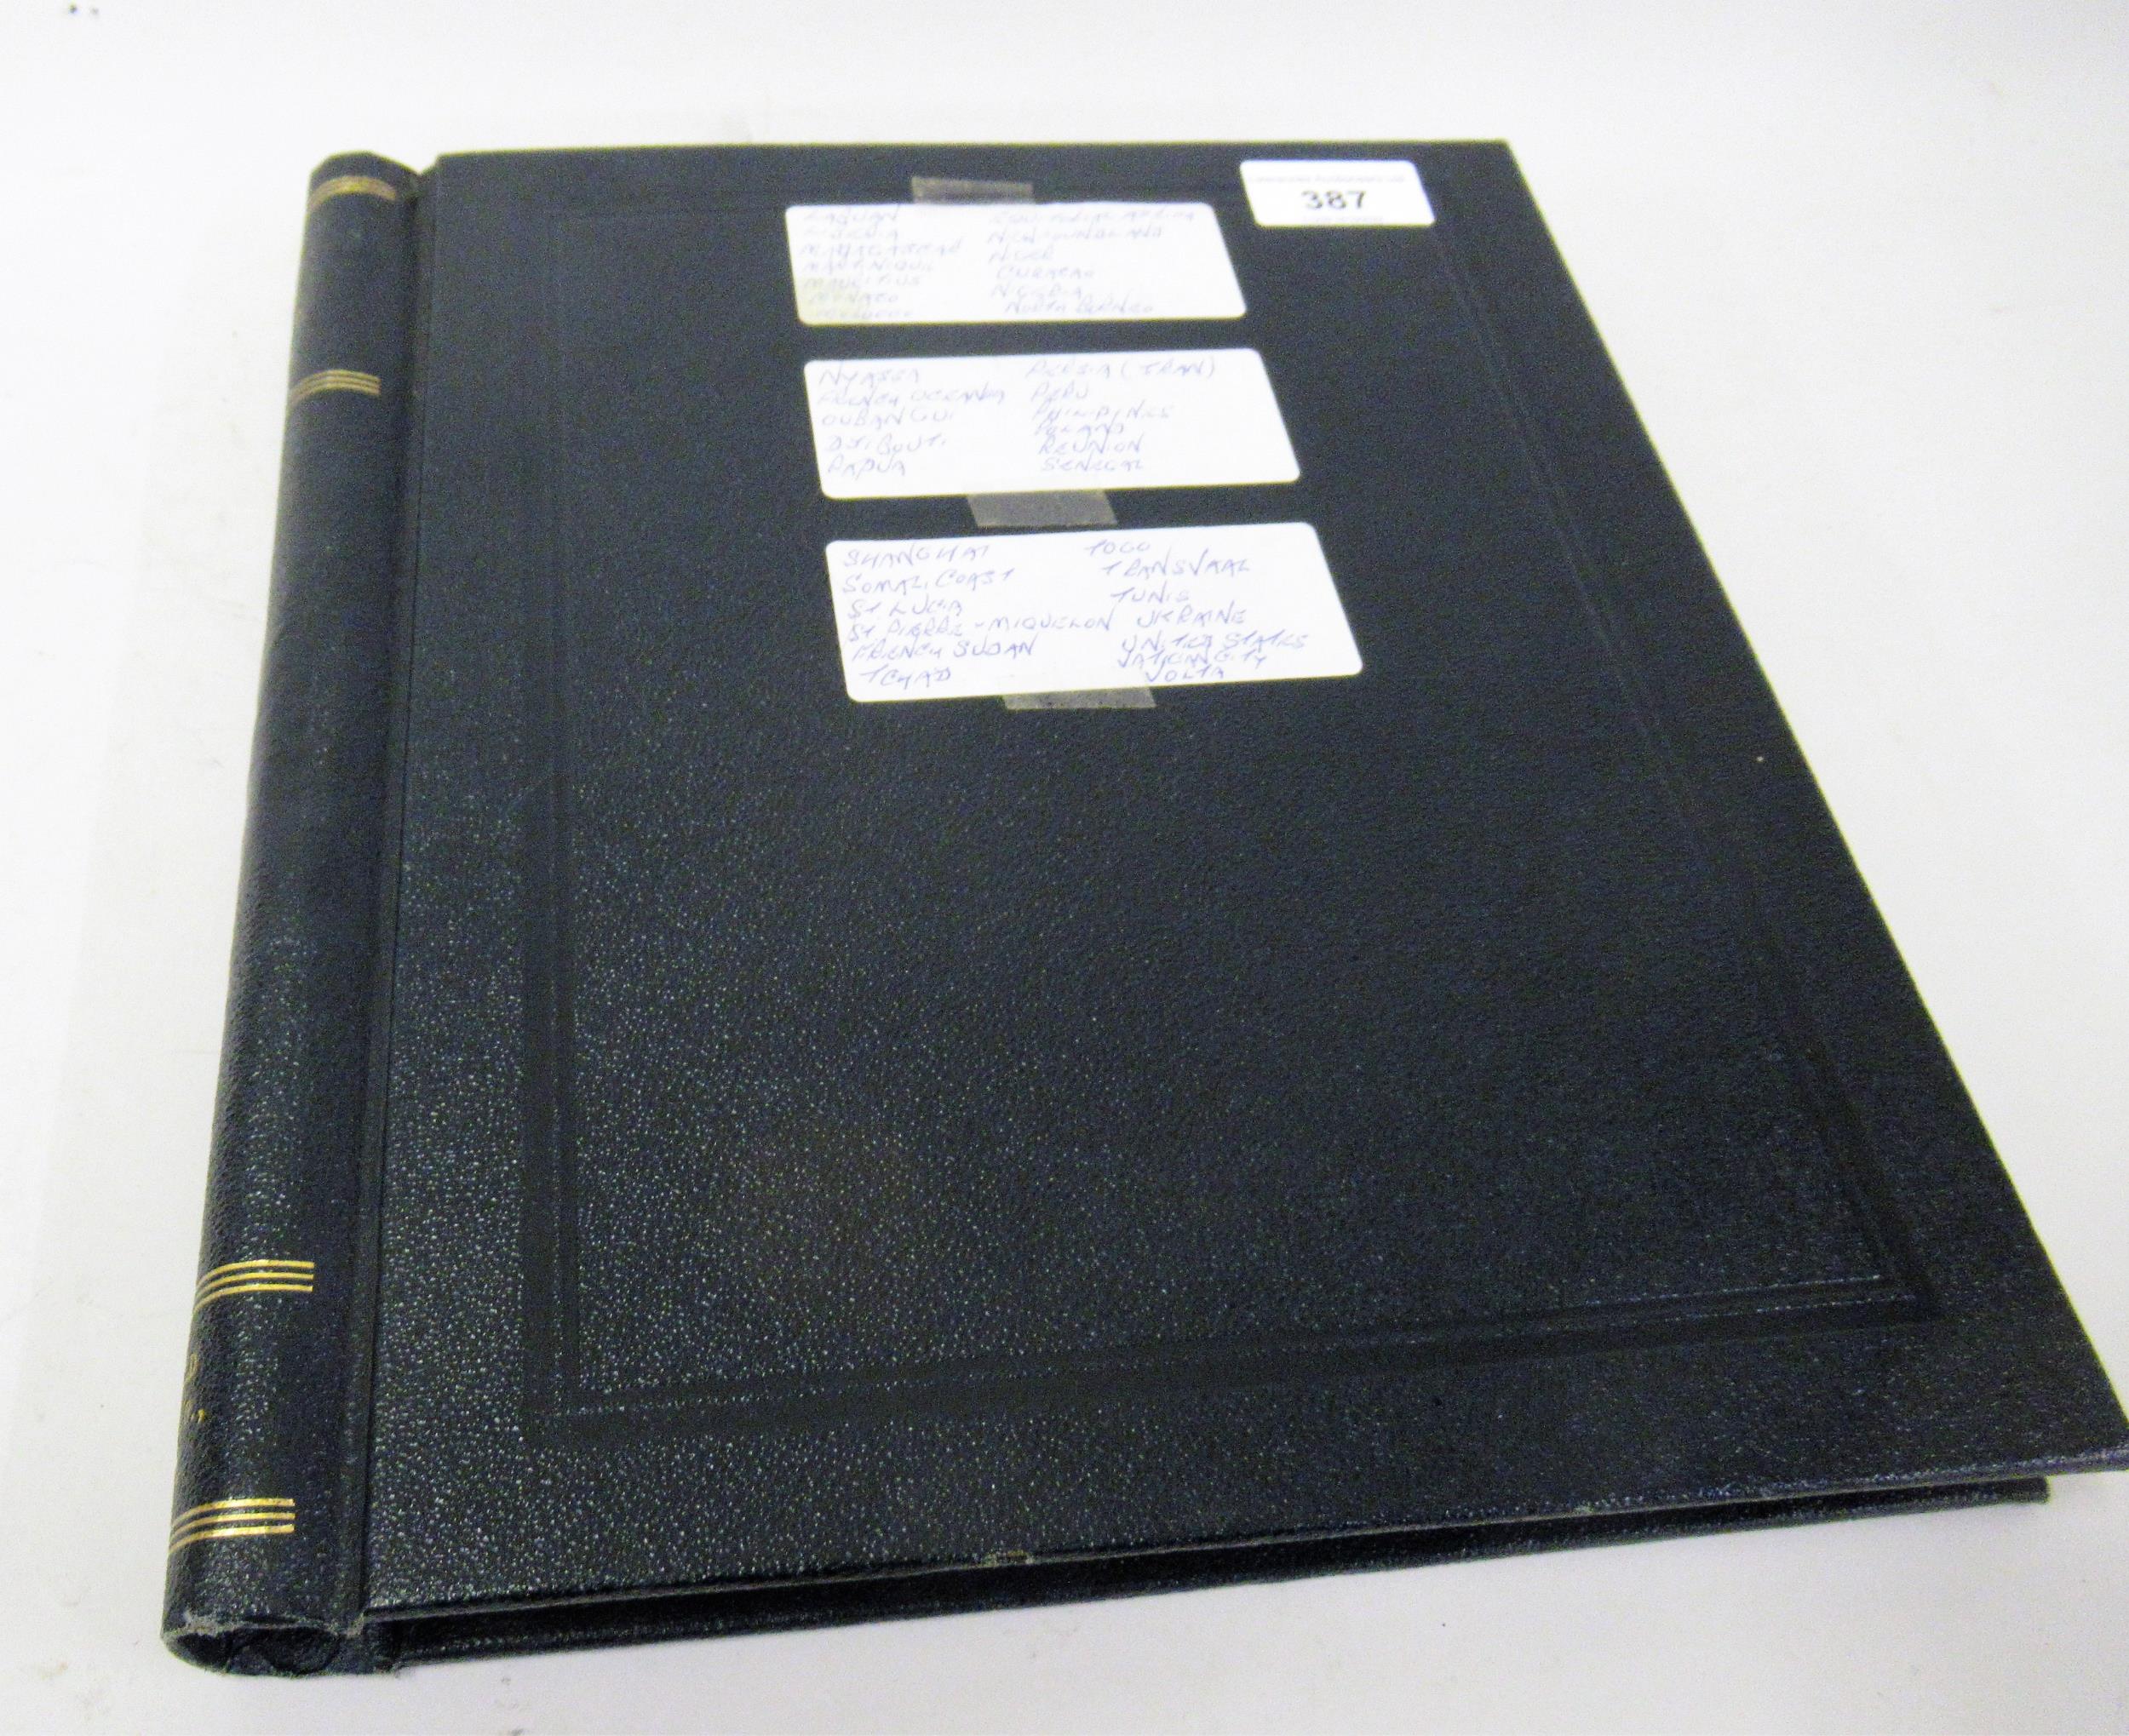 Black album containing a collection of World stamps, including Liberia